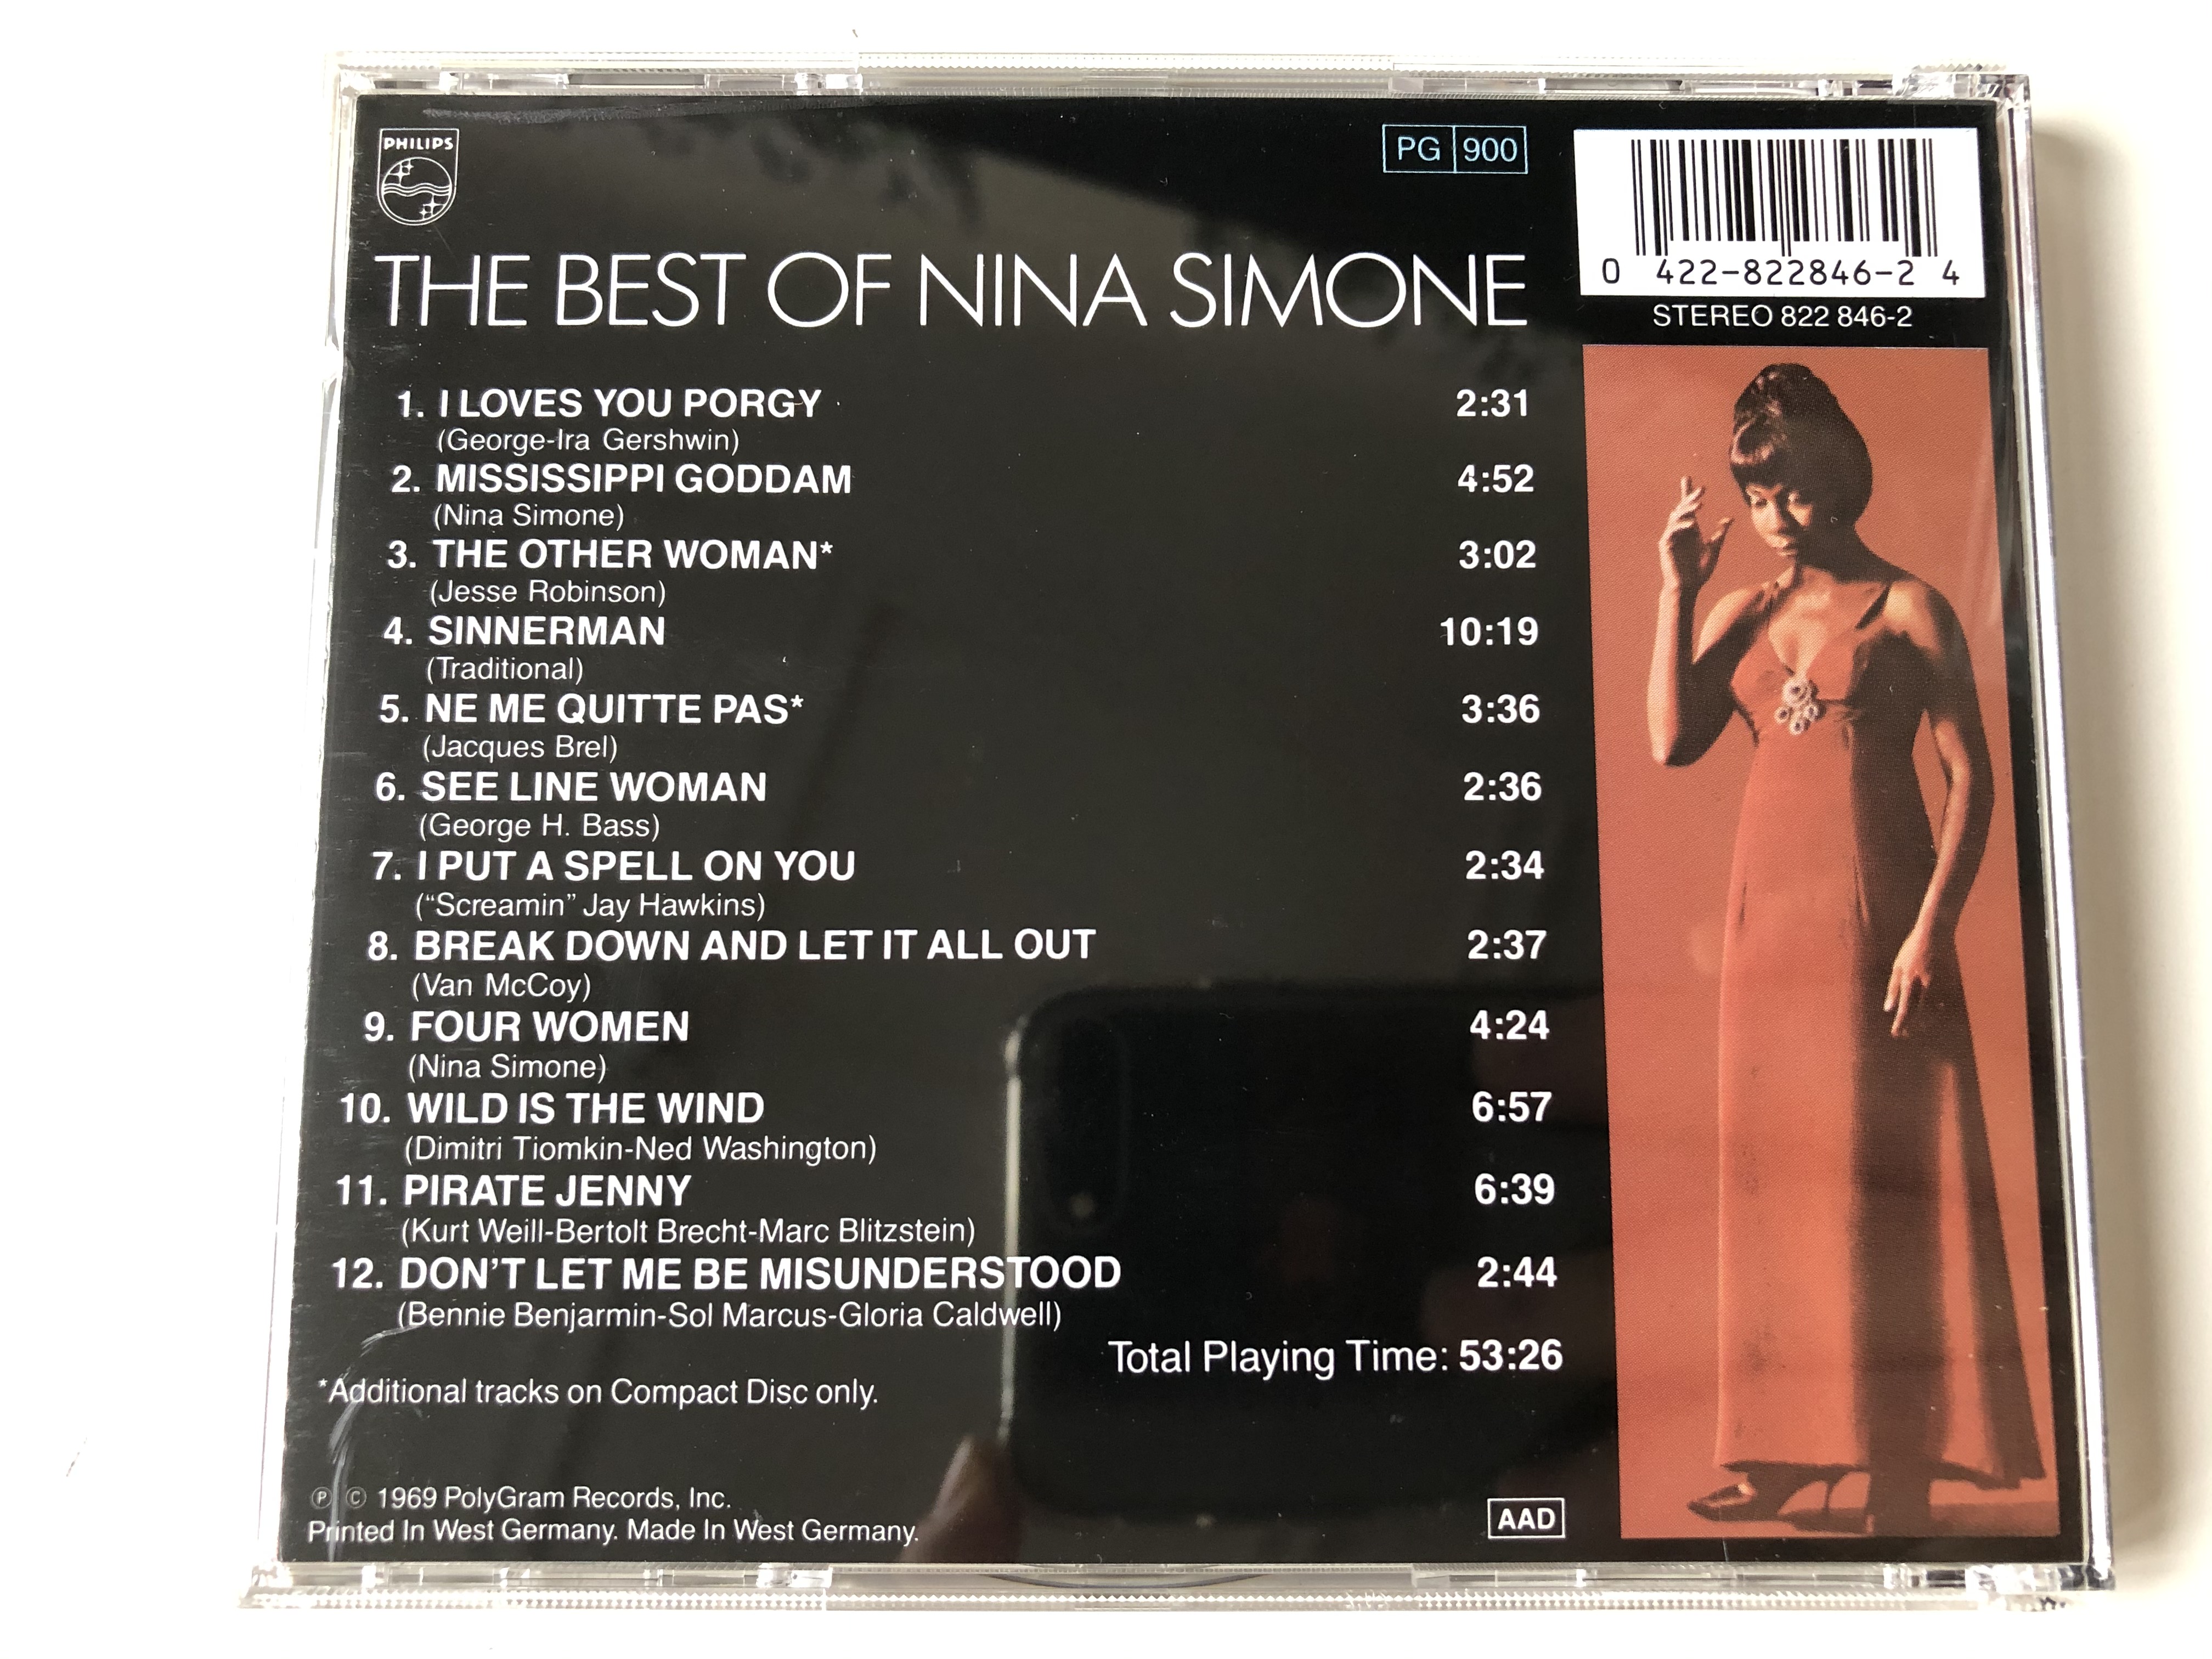 the-best-of-nina-simone-i-loves-you-porgy-from-porgy-bess-break-down-and-let-it-all-out-four-women-pirate-jenny-i-put-a-spell-on-you-sinnerman-don-t-let-me-be-misunderstood-mis.jpg